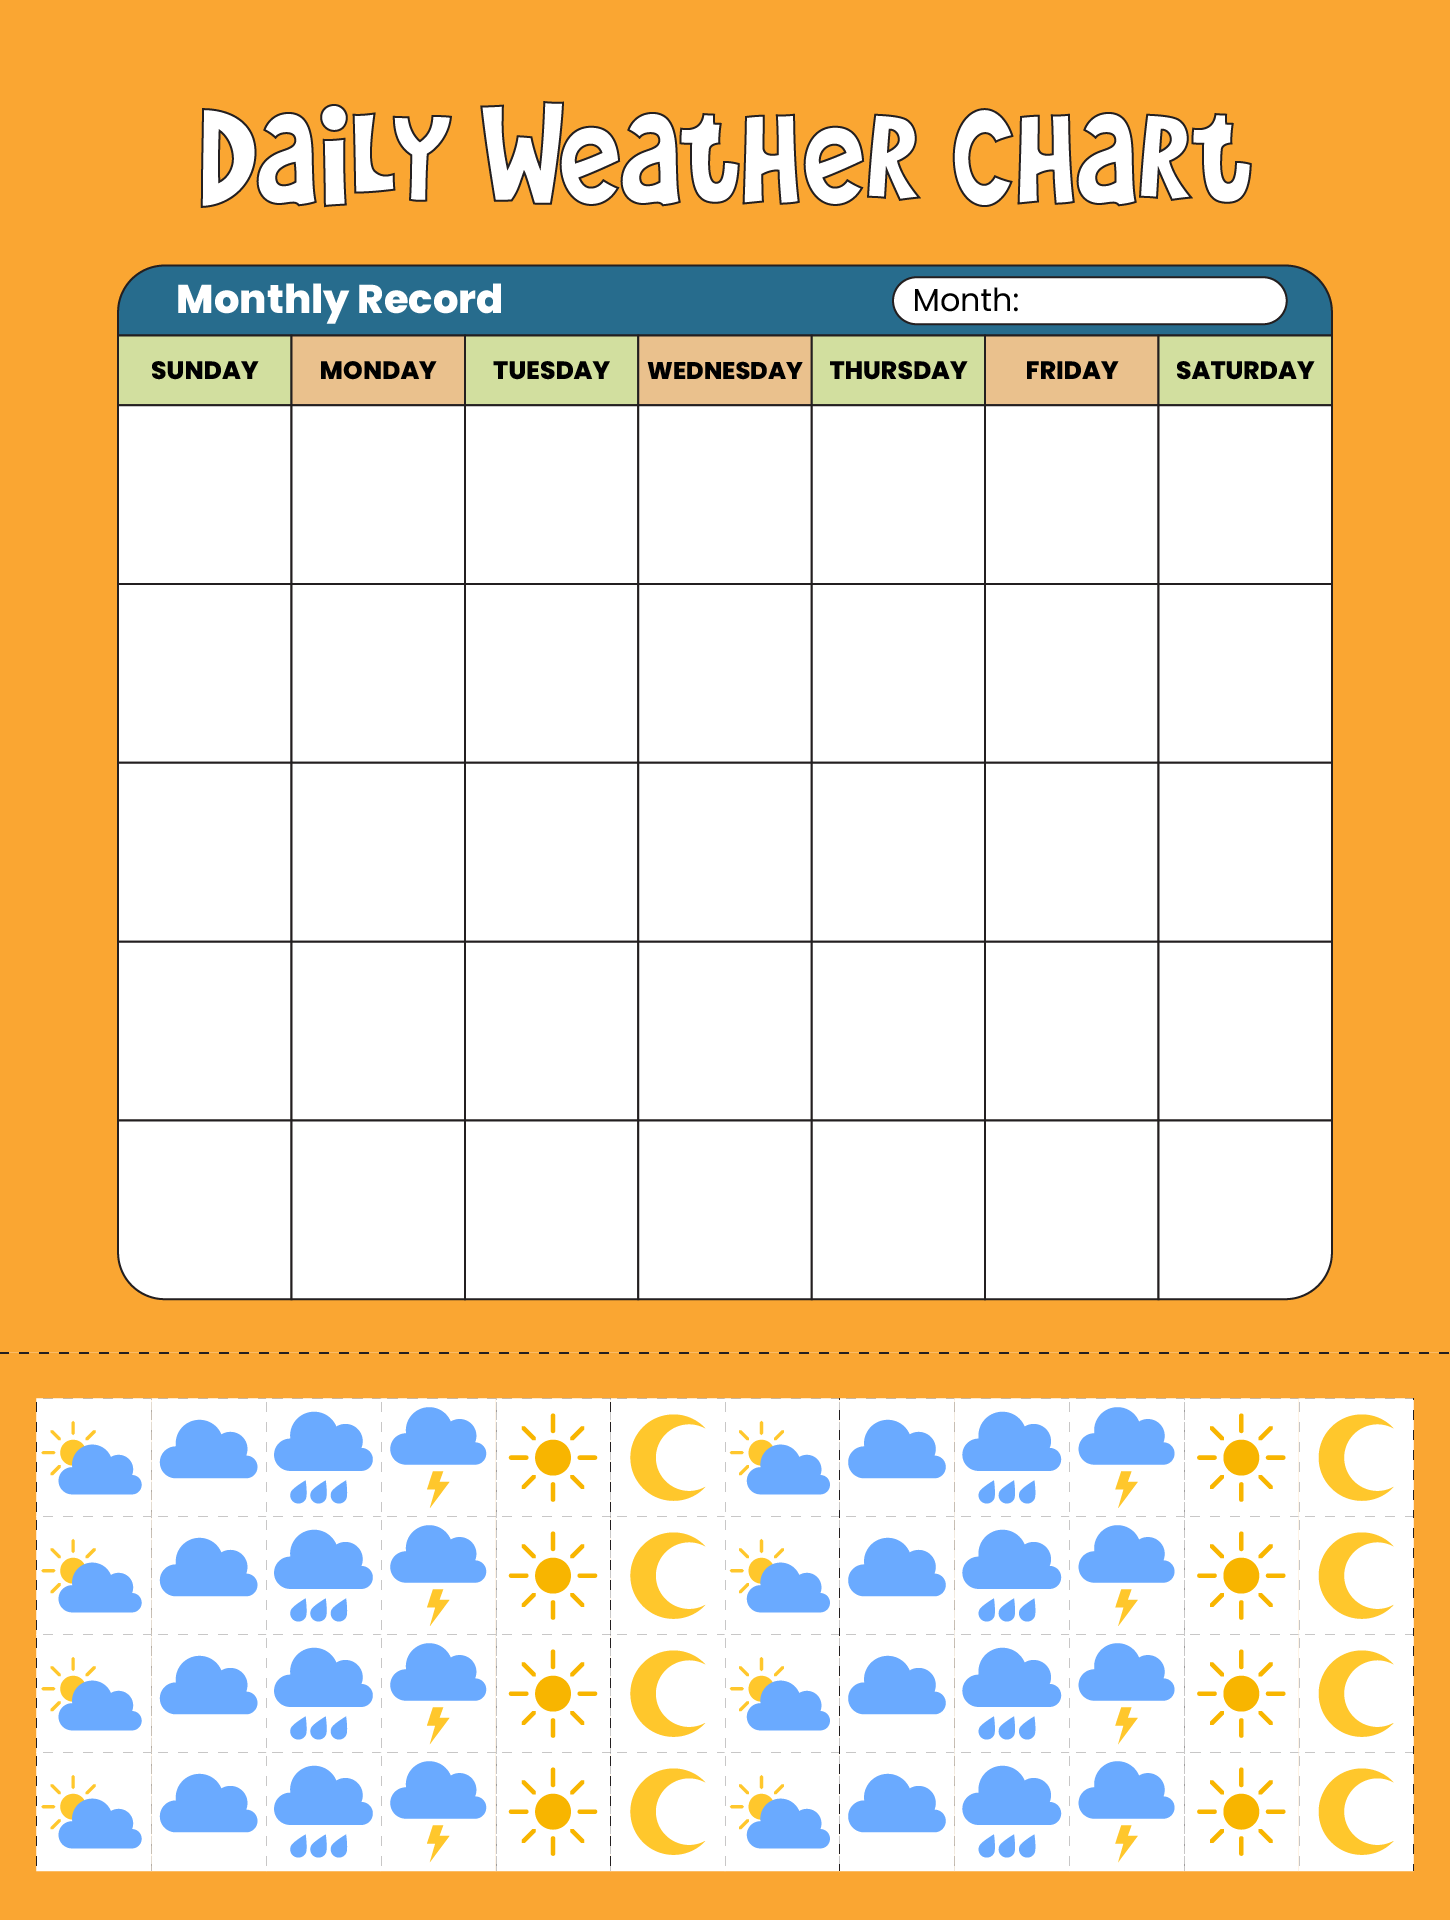 Daily Weather Chart Printable